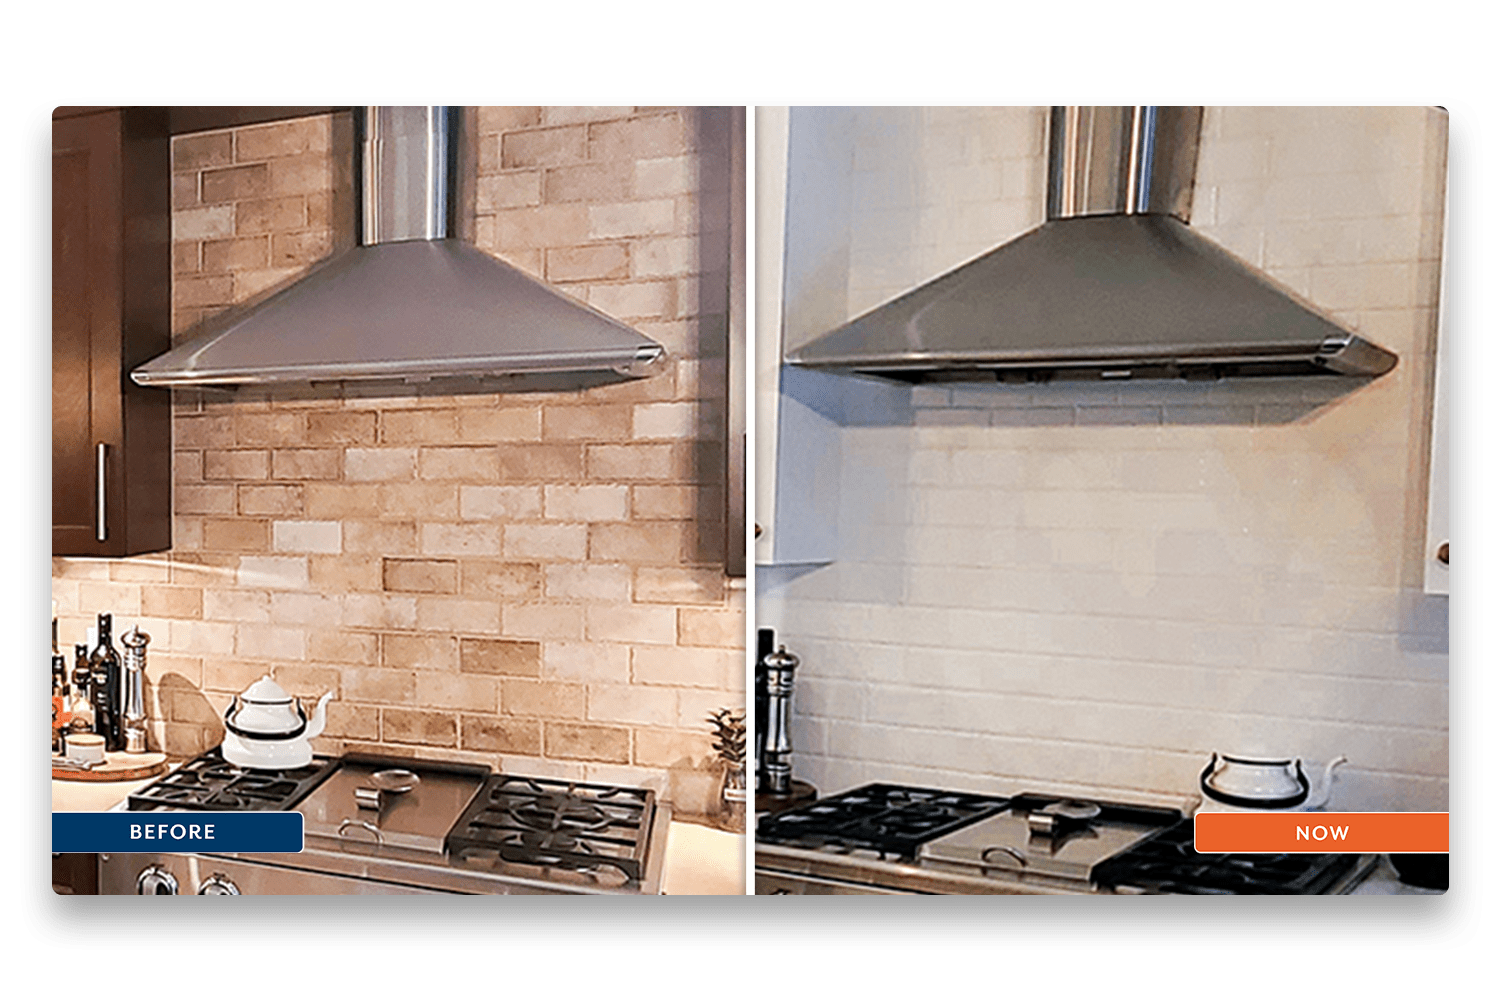 A before and after image of a stone backsplash that has been painted white.